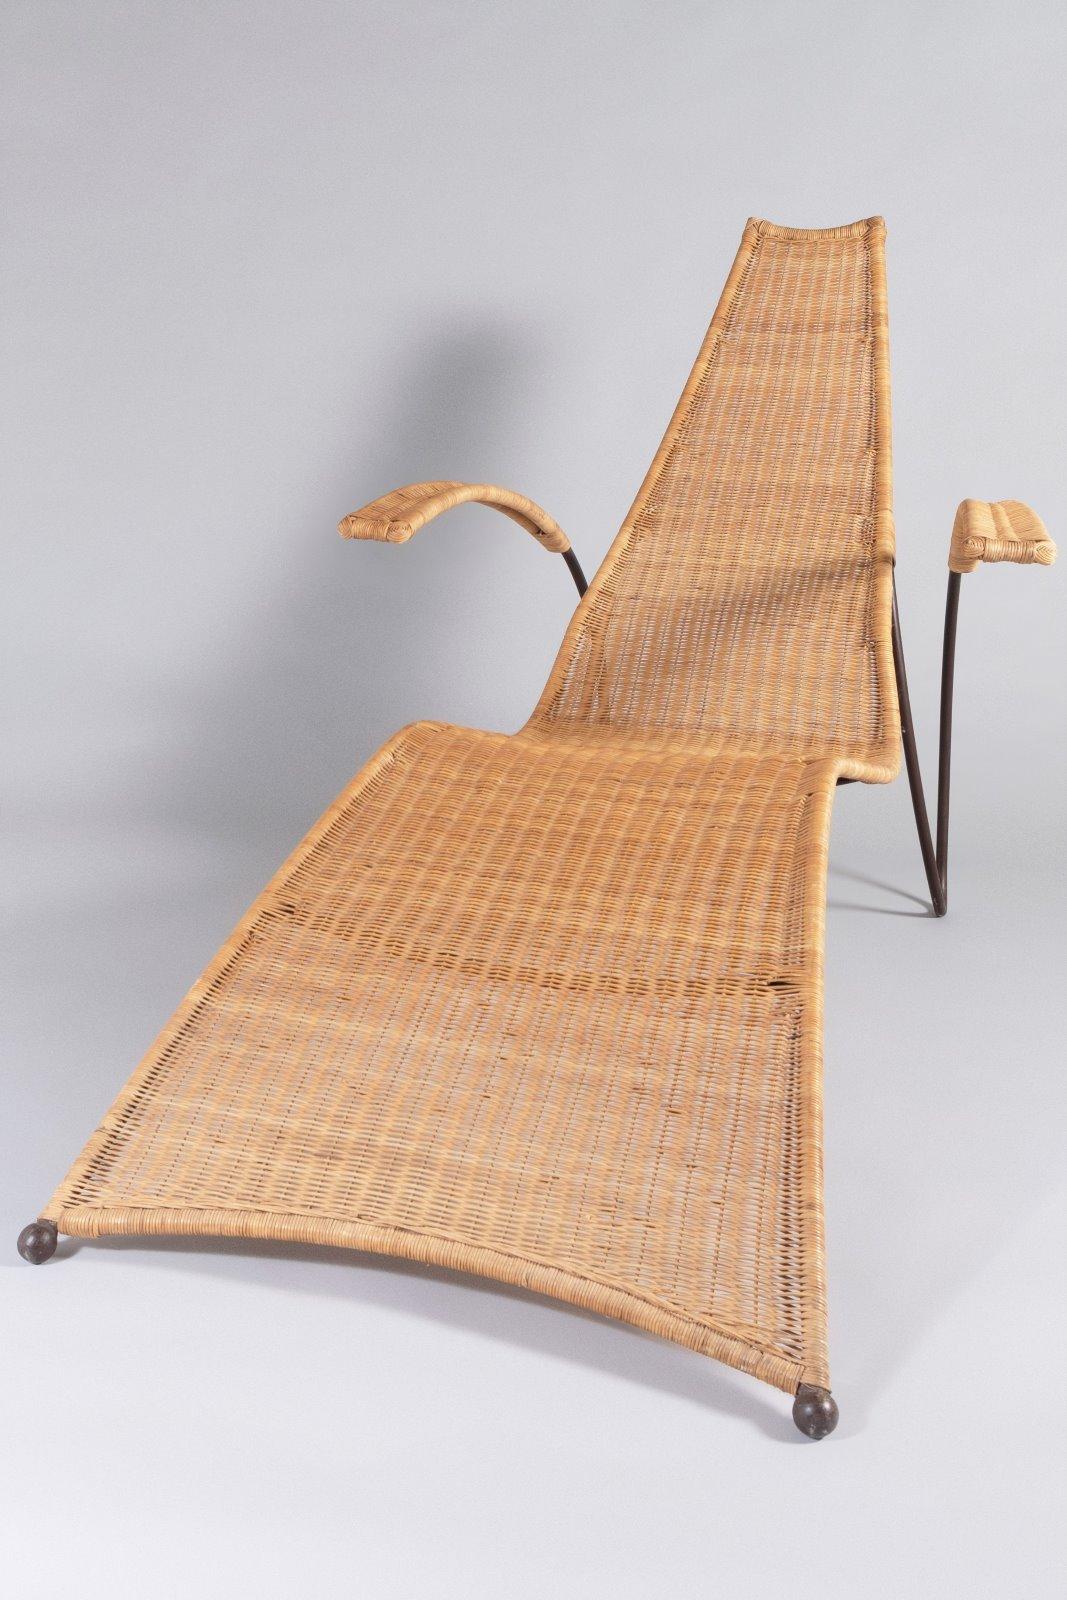 French 1930s Modernist Wrought Iron Frame Wicker Sun Longer Chaise with Arms + Footrest For Sale